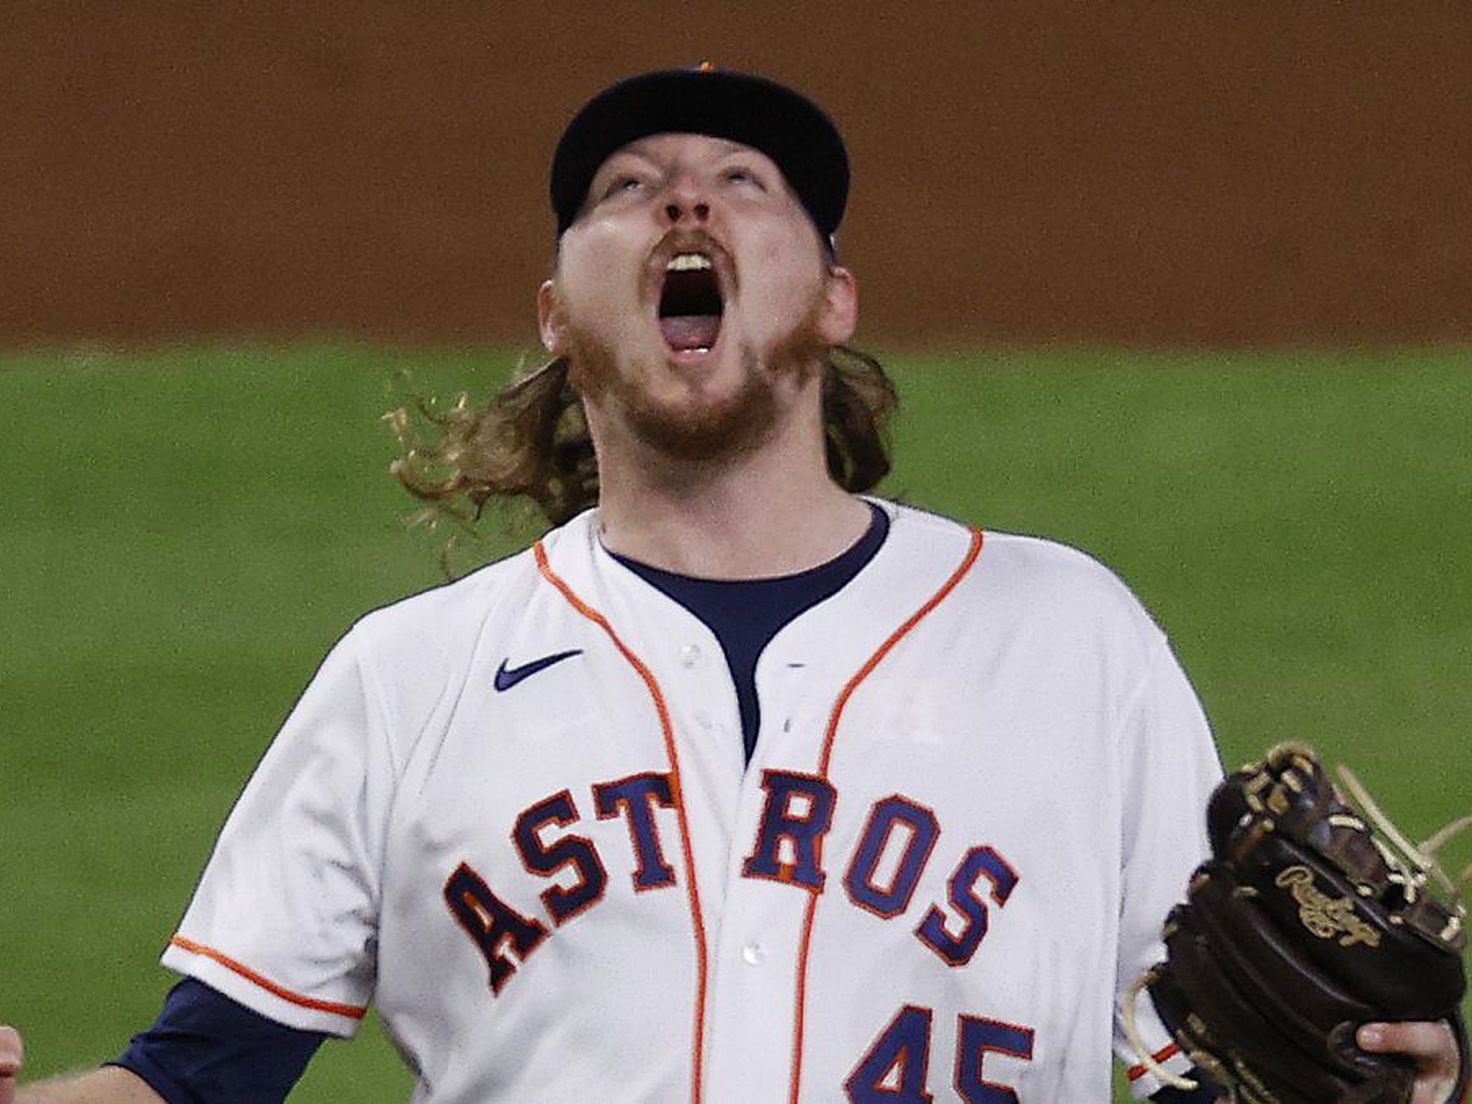 Red Sox vs. Astros commentary, scores, stats and updates